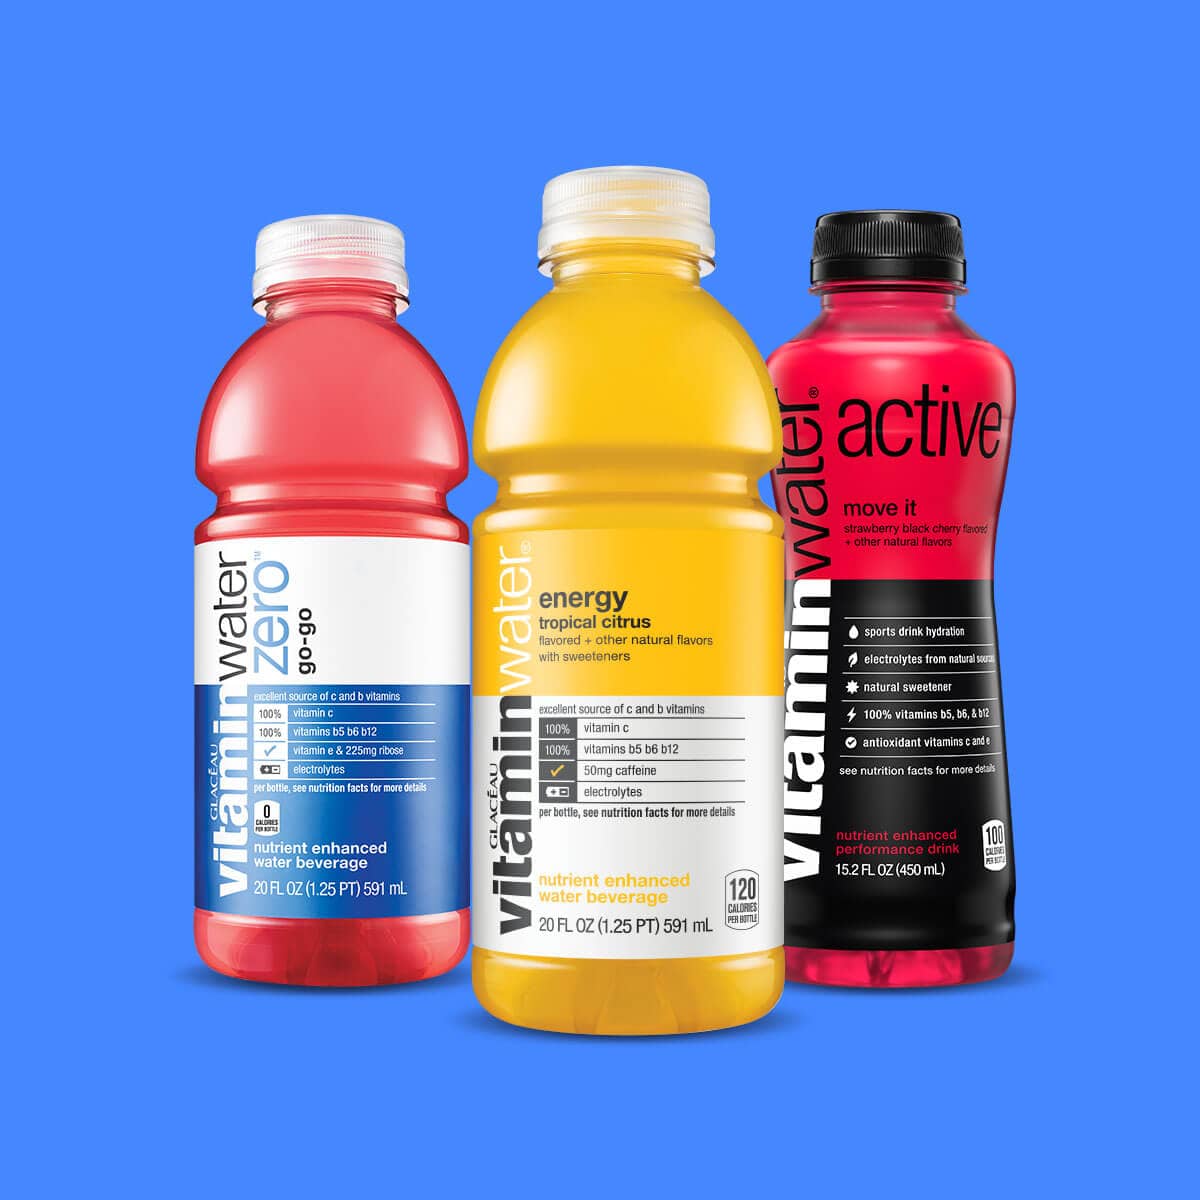 Is Vitamin Water Good For You?